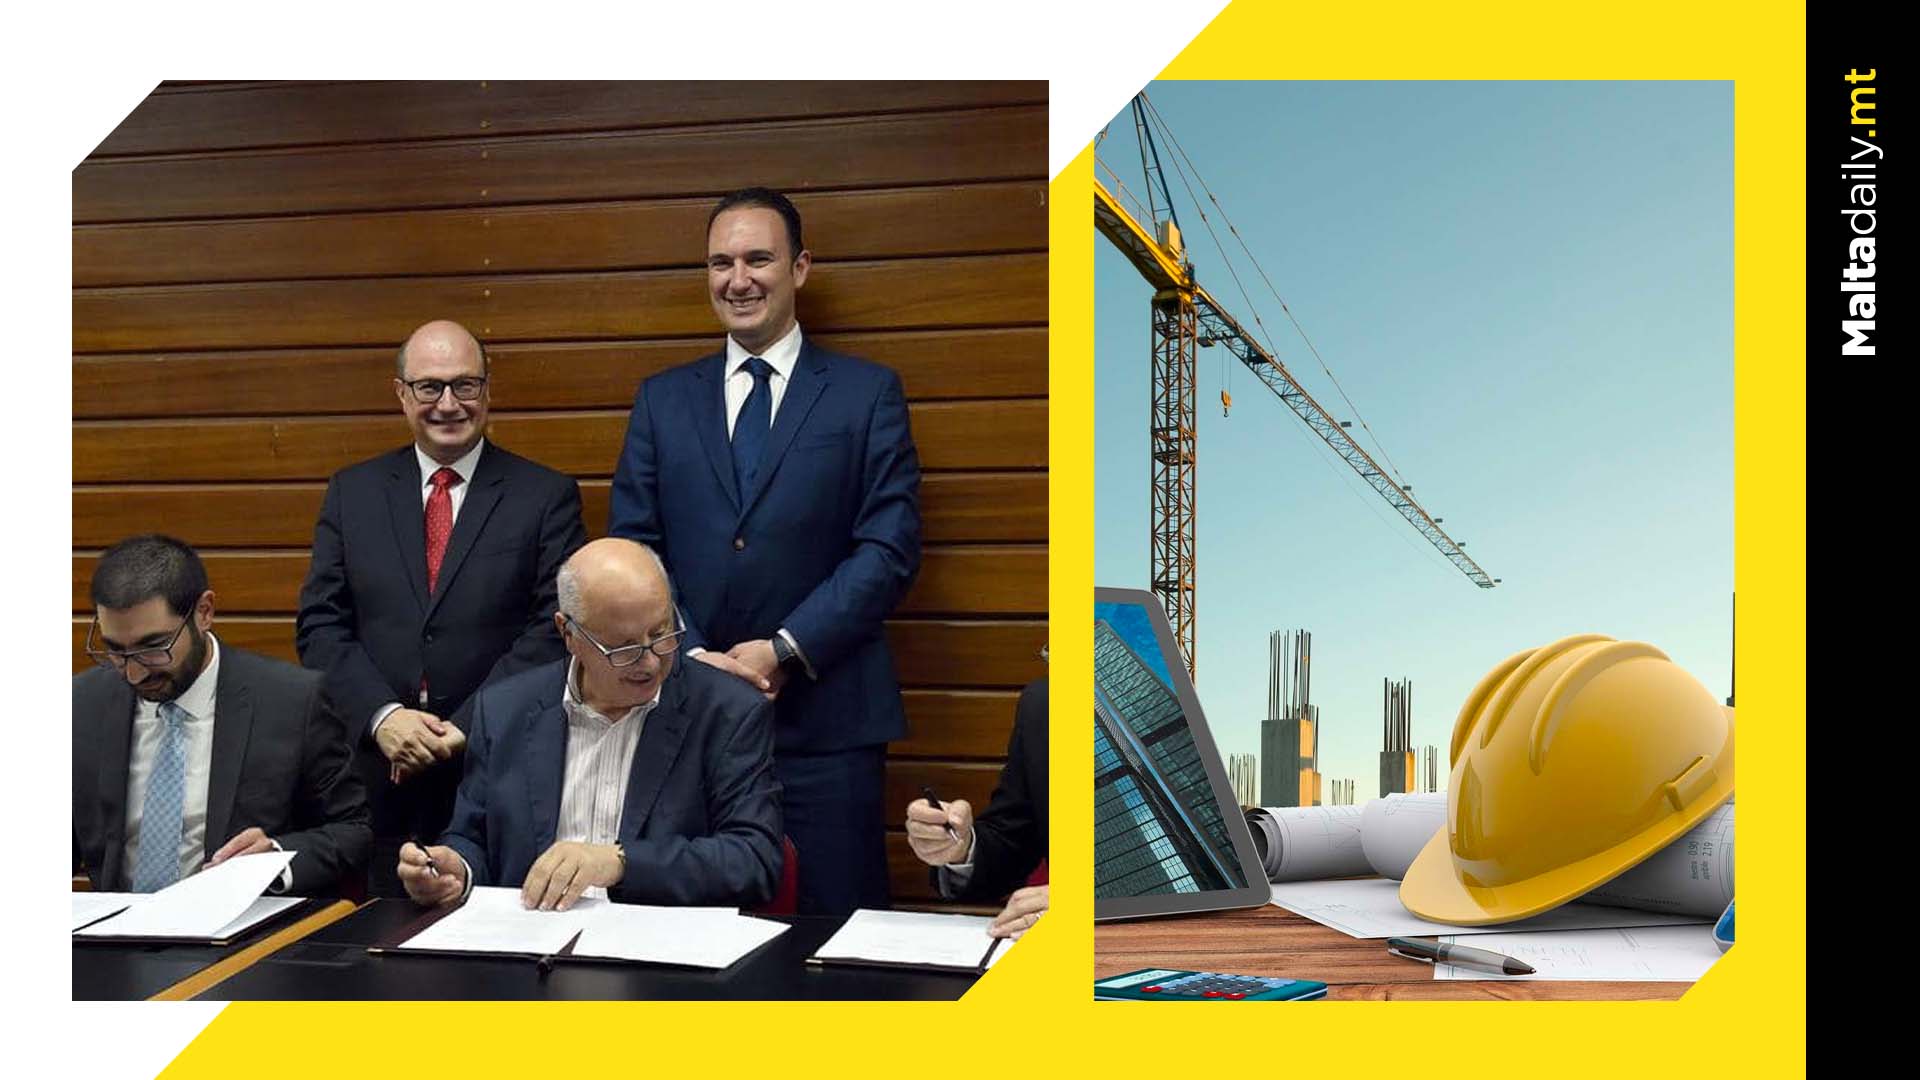 Collaboration agreement with the Faculty of Laws to make a compendium of laws that regulate construction